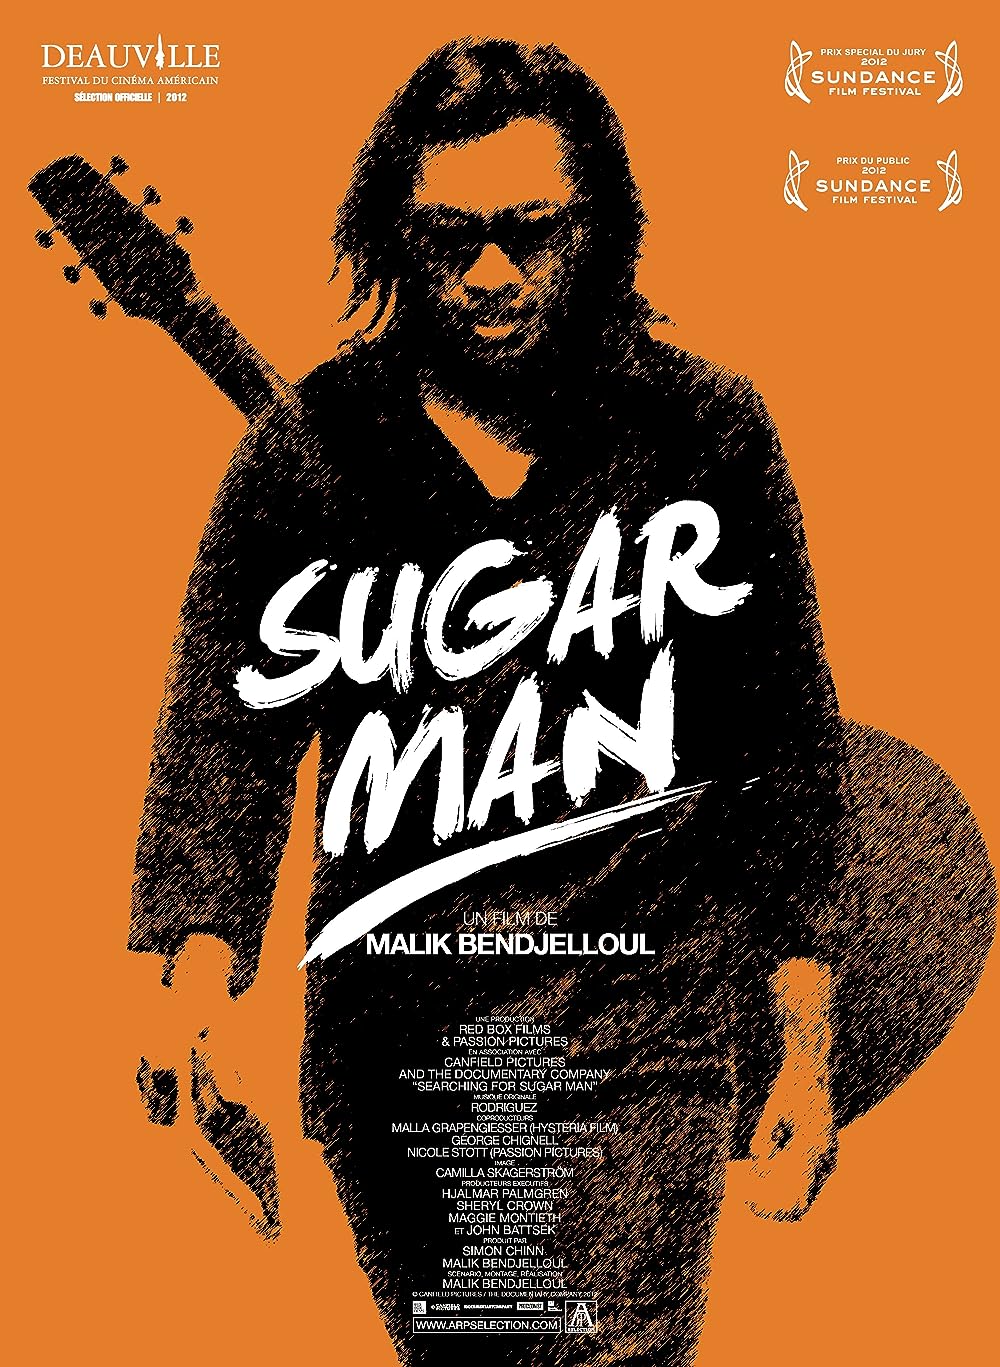 Searching for sugar man music documentary